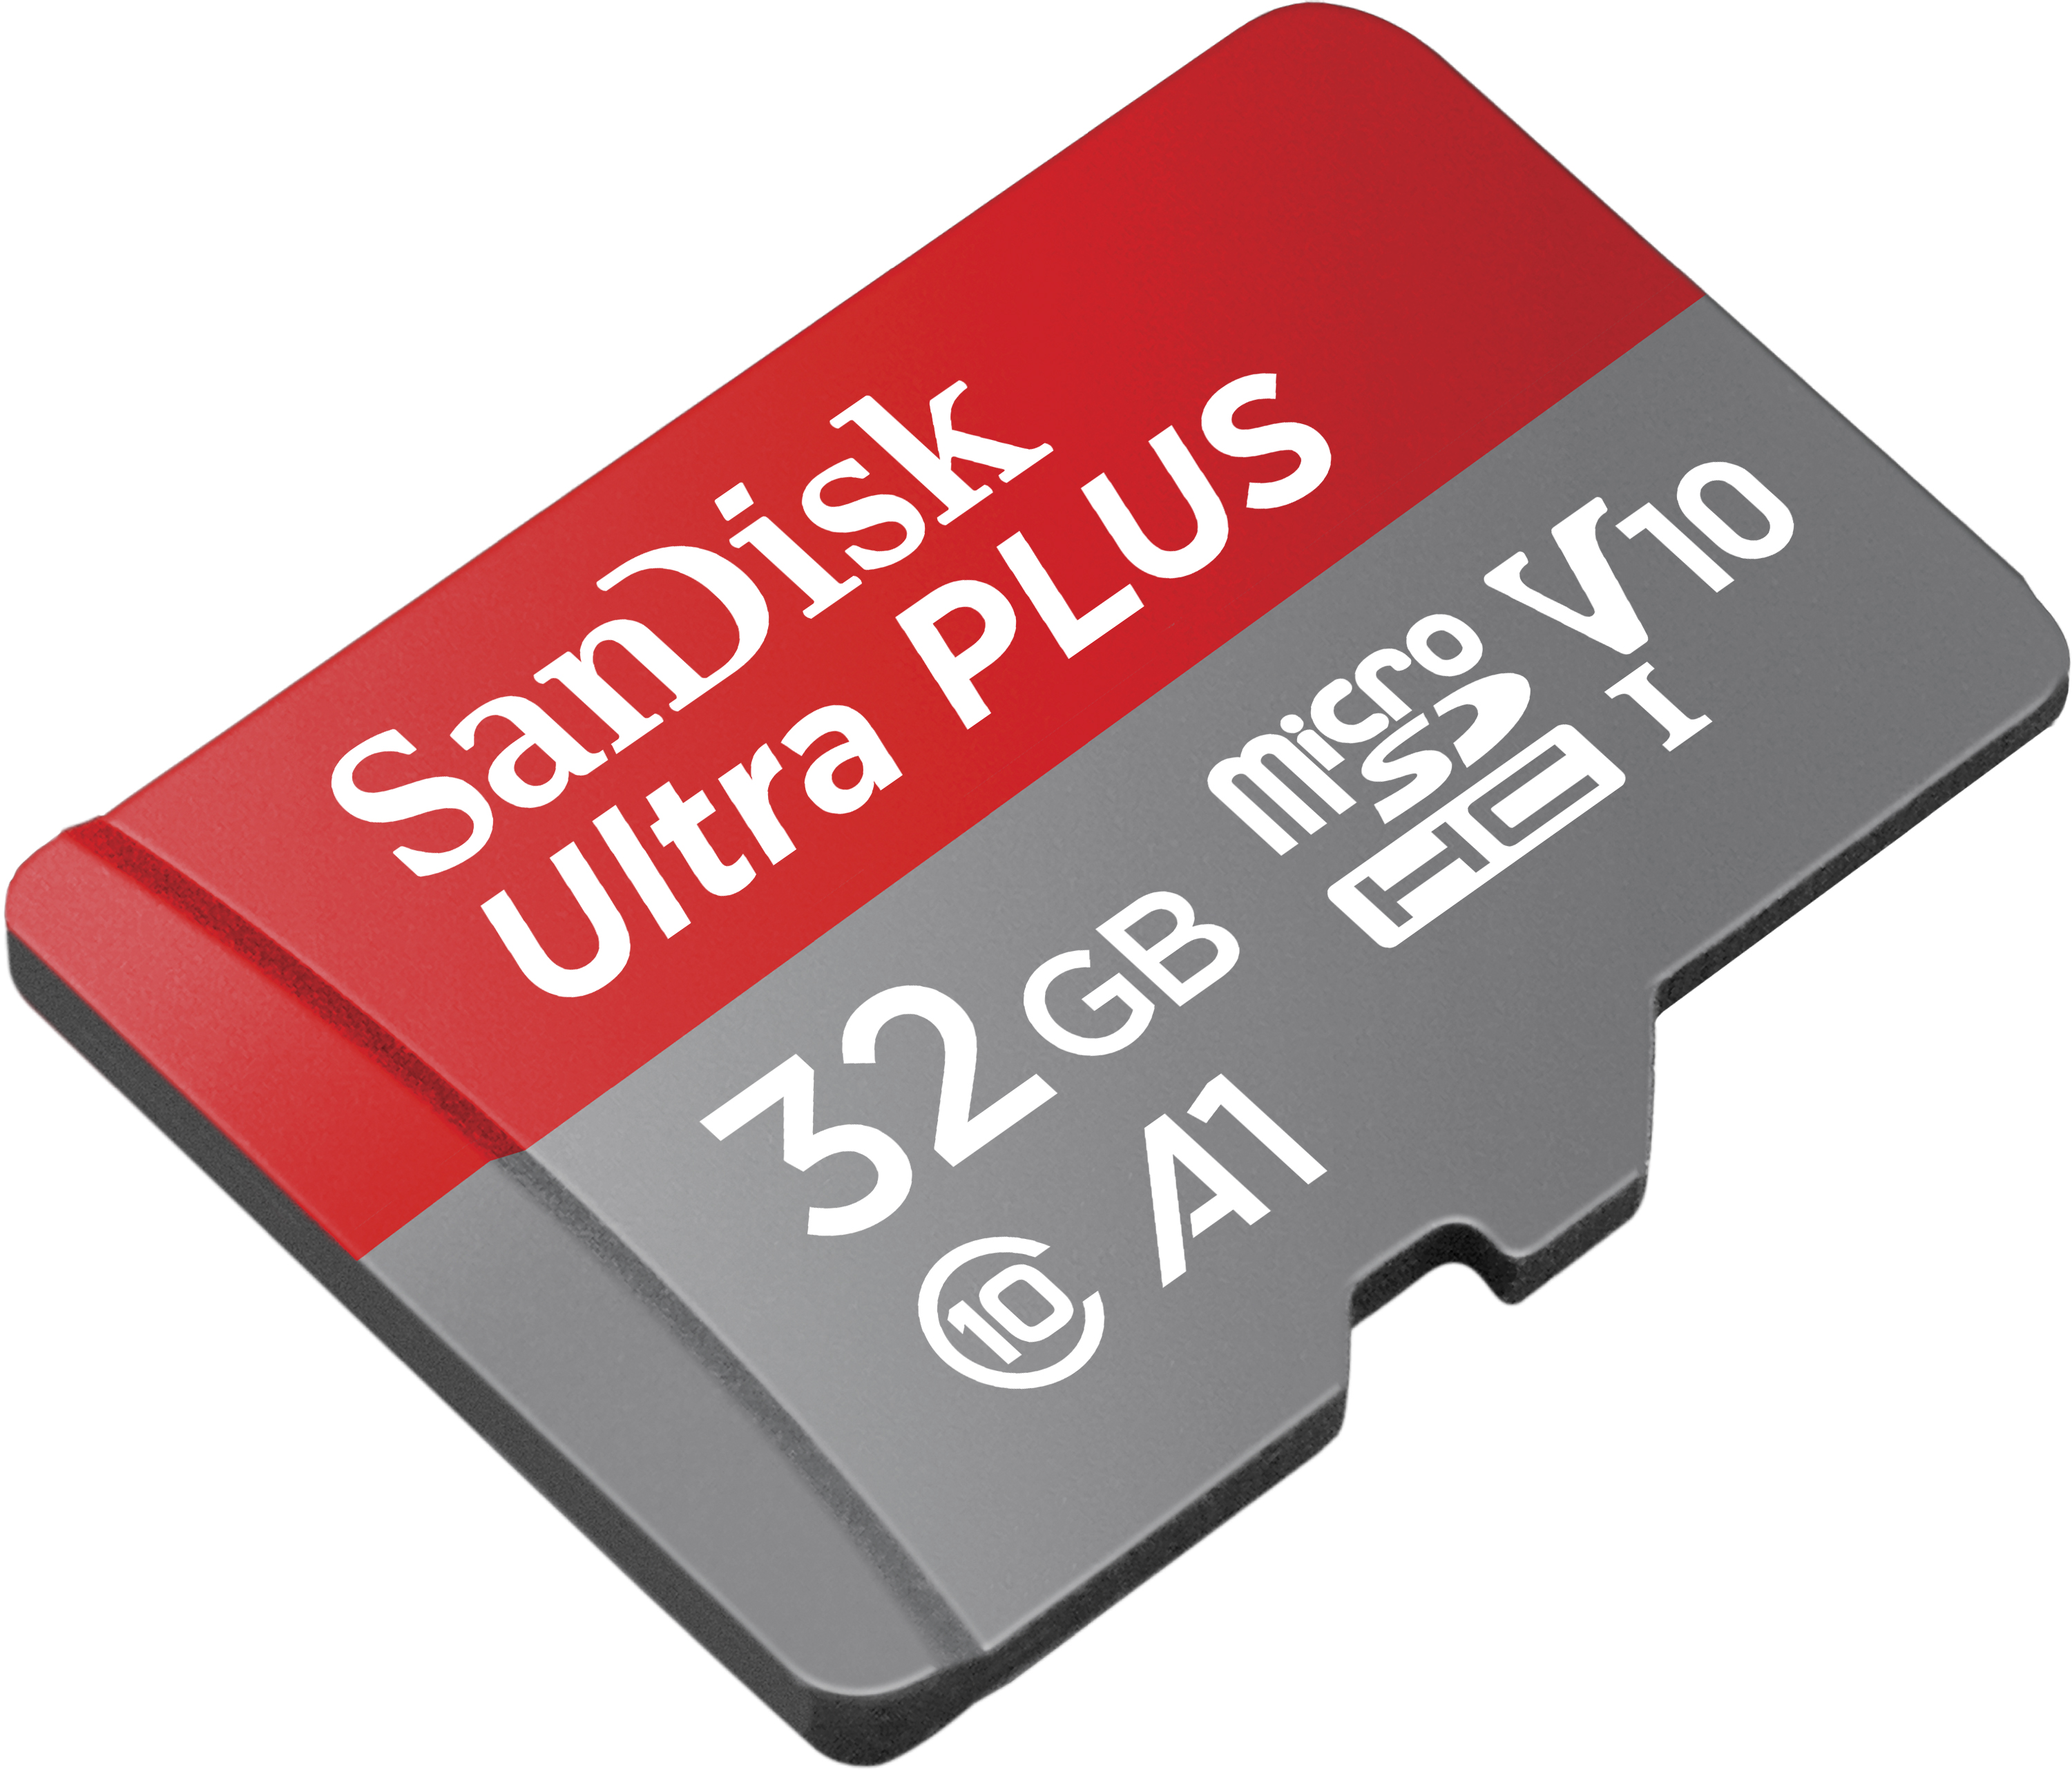 SanDisk Ultra® Plus MicroSDHC™ UHS-I Card, 32GB with Adapter - image 5 of 5